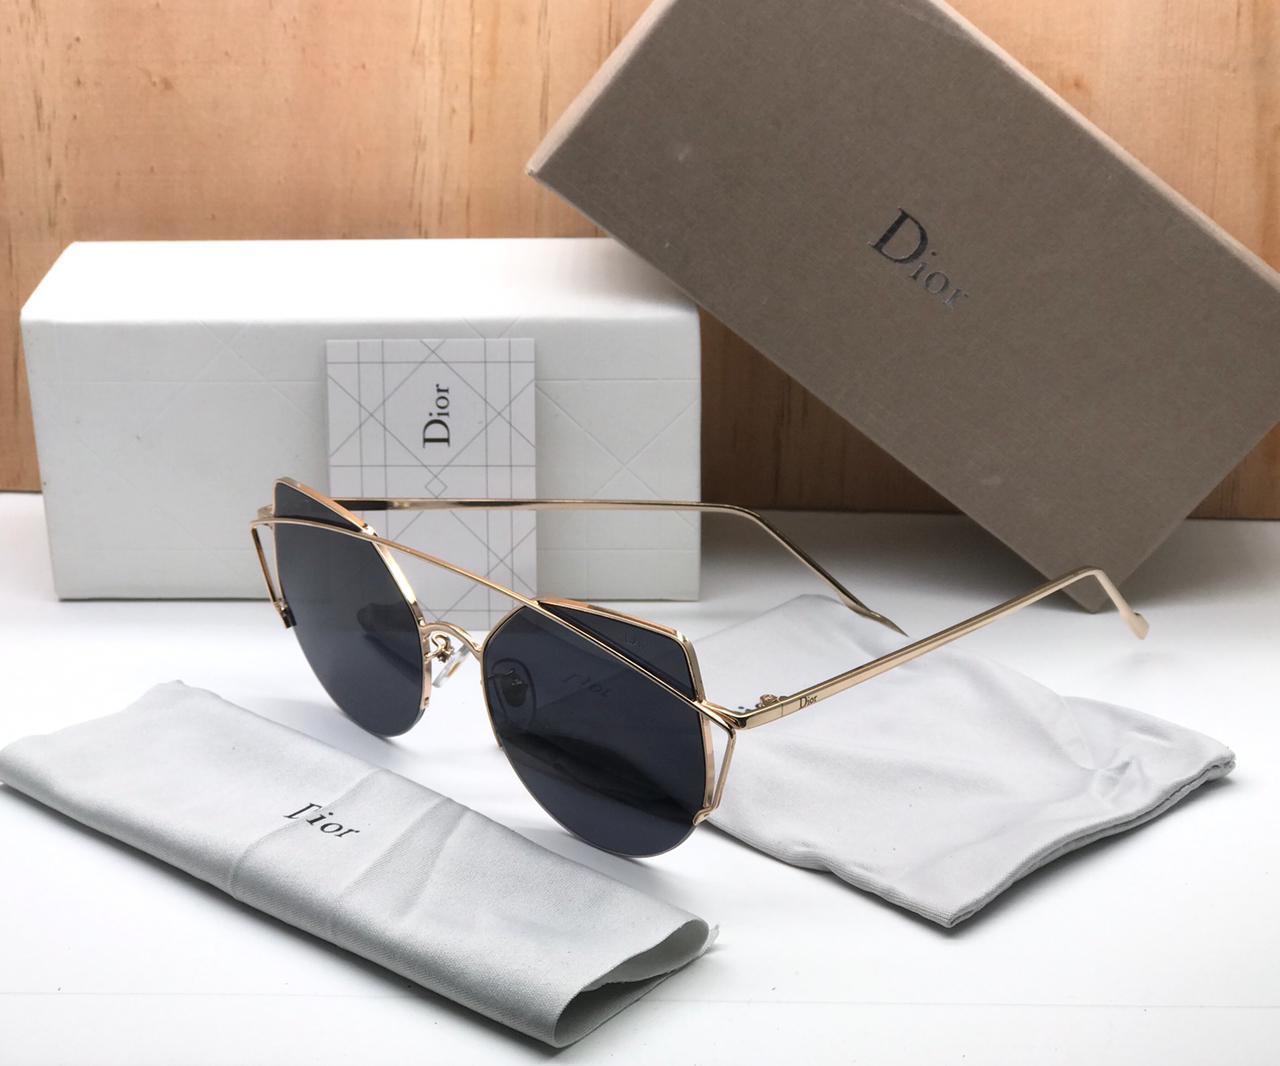 Dior Black Color Glass Cat Eye Sunglasses For Woman Or Girl Dr-Ct-38 Gold Frame & Gold Stick Gift Sunglass_Dr-Ct-38